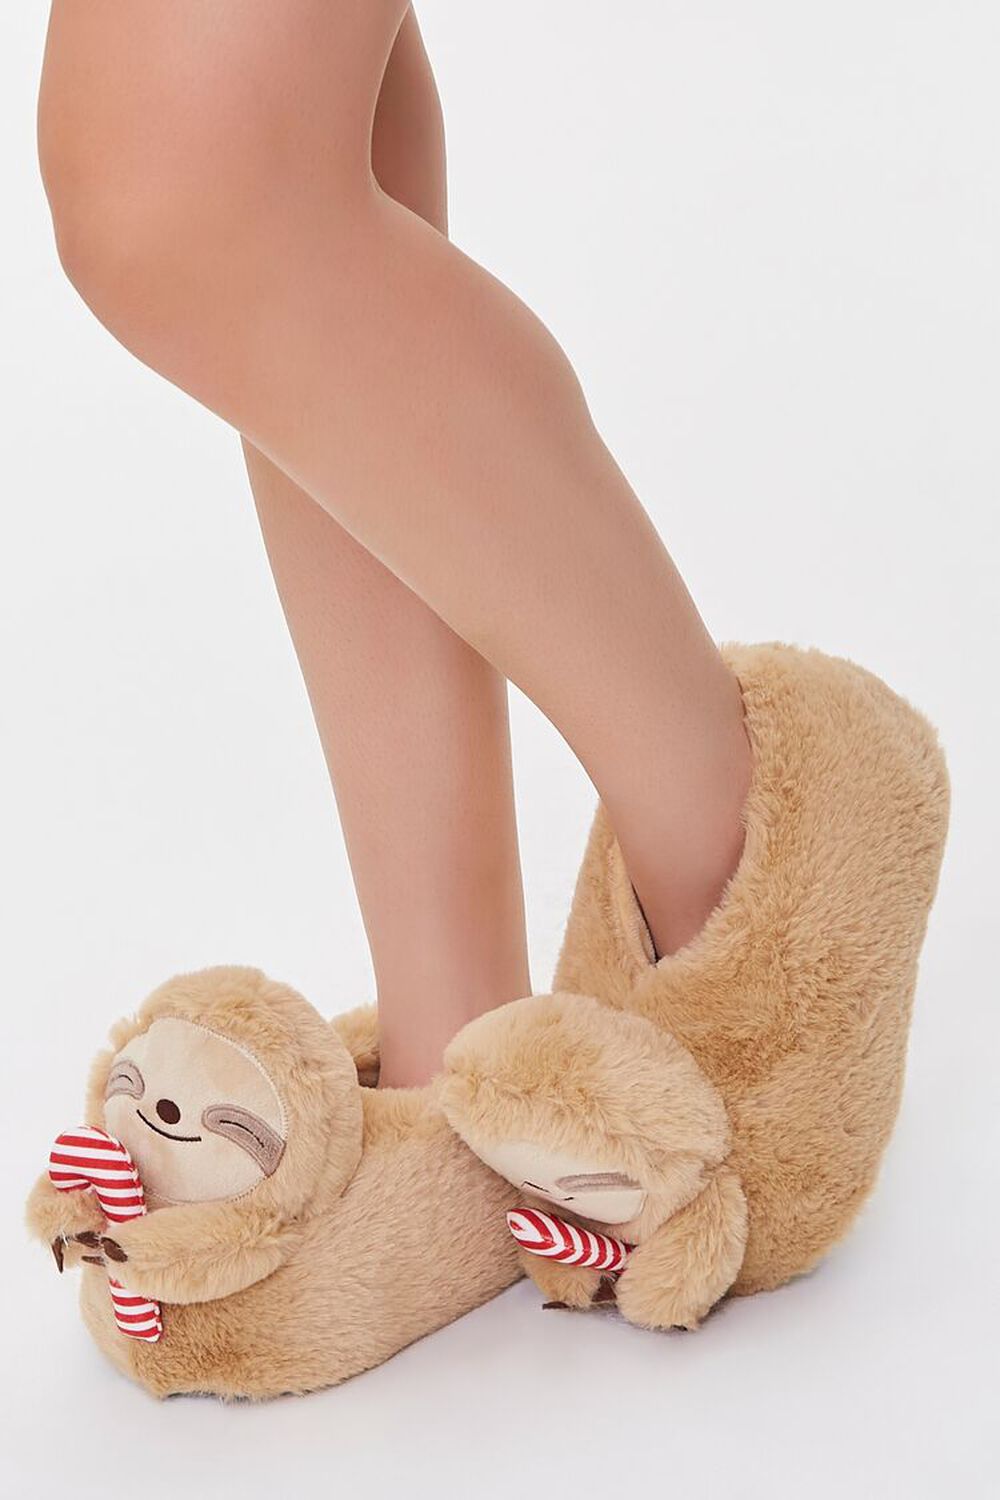 Plush Sloth Indoor Slippers